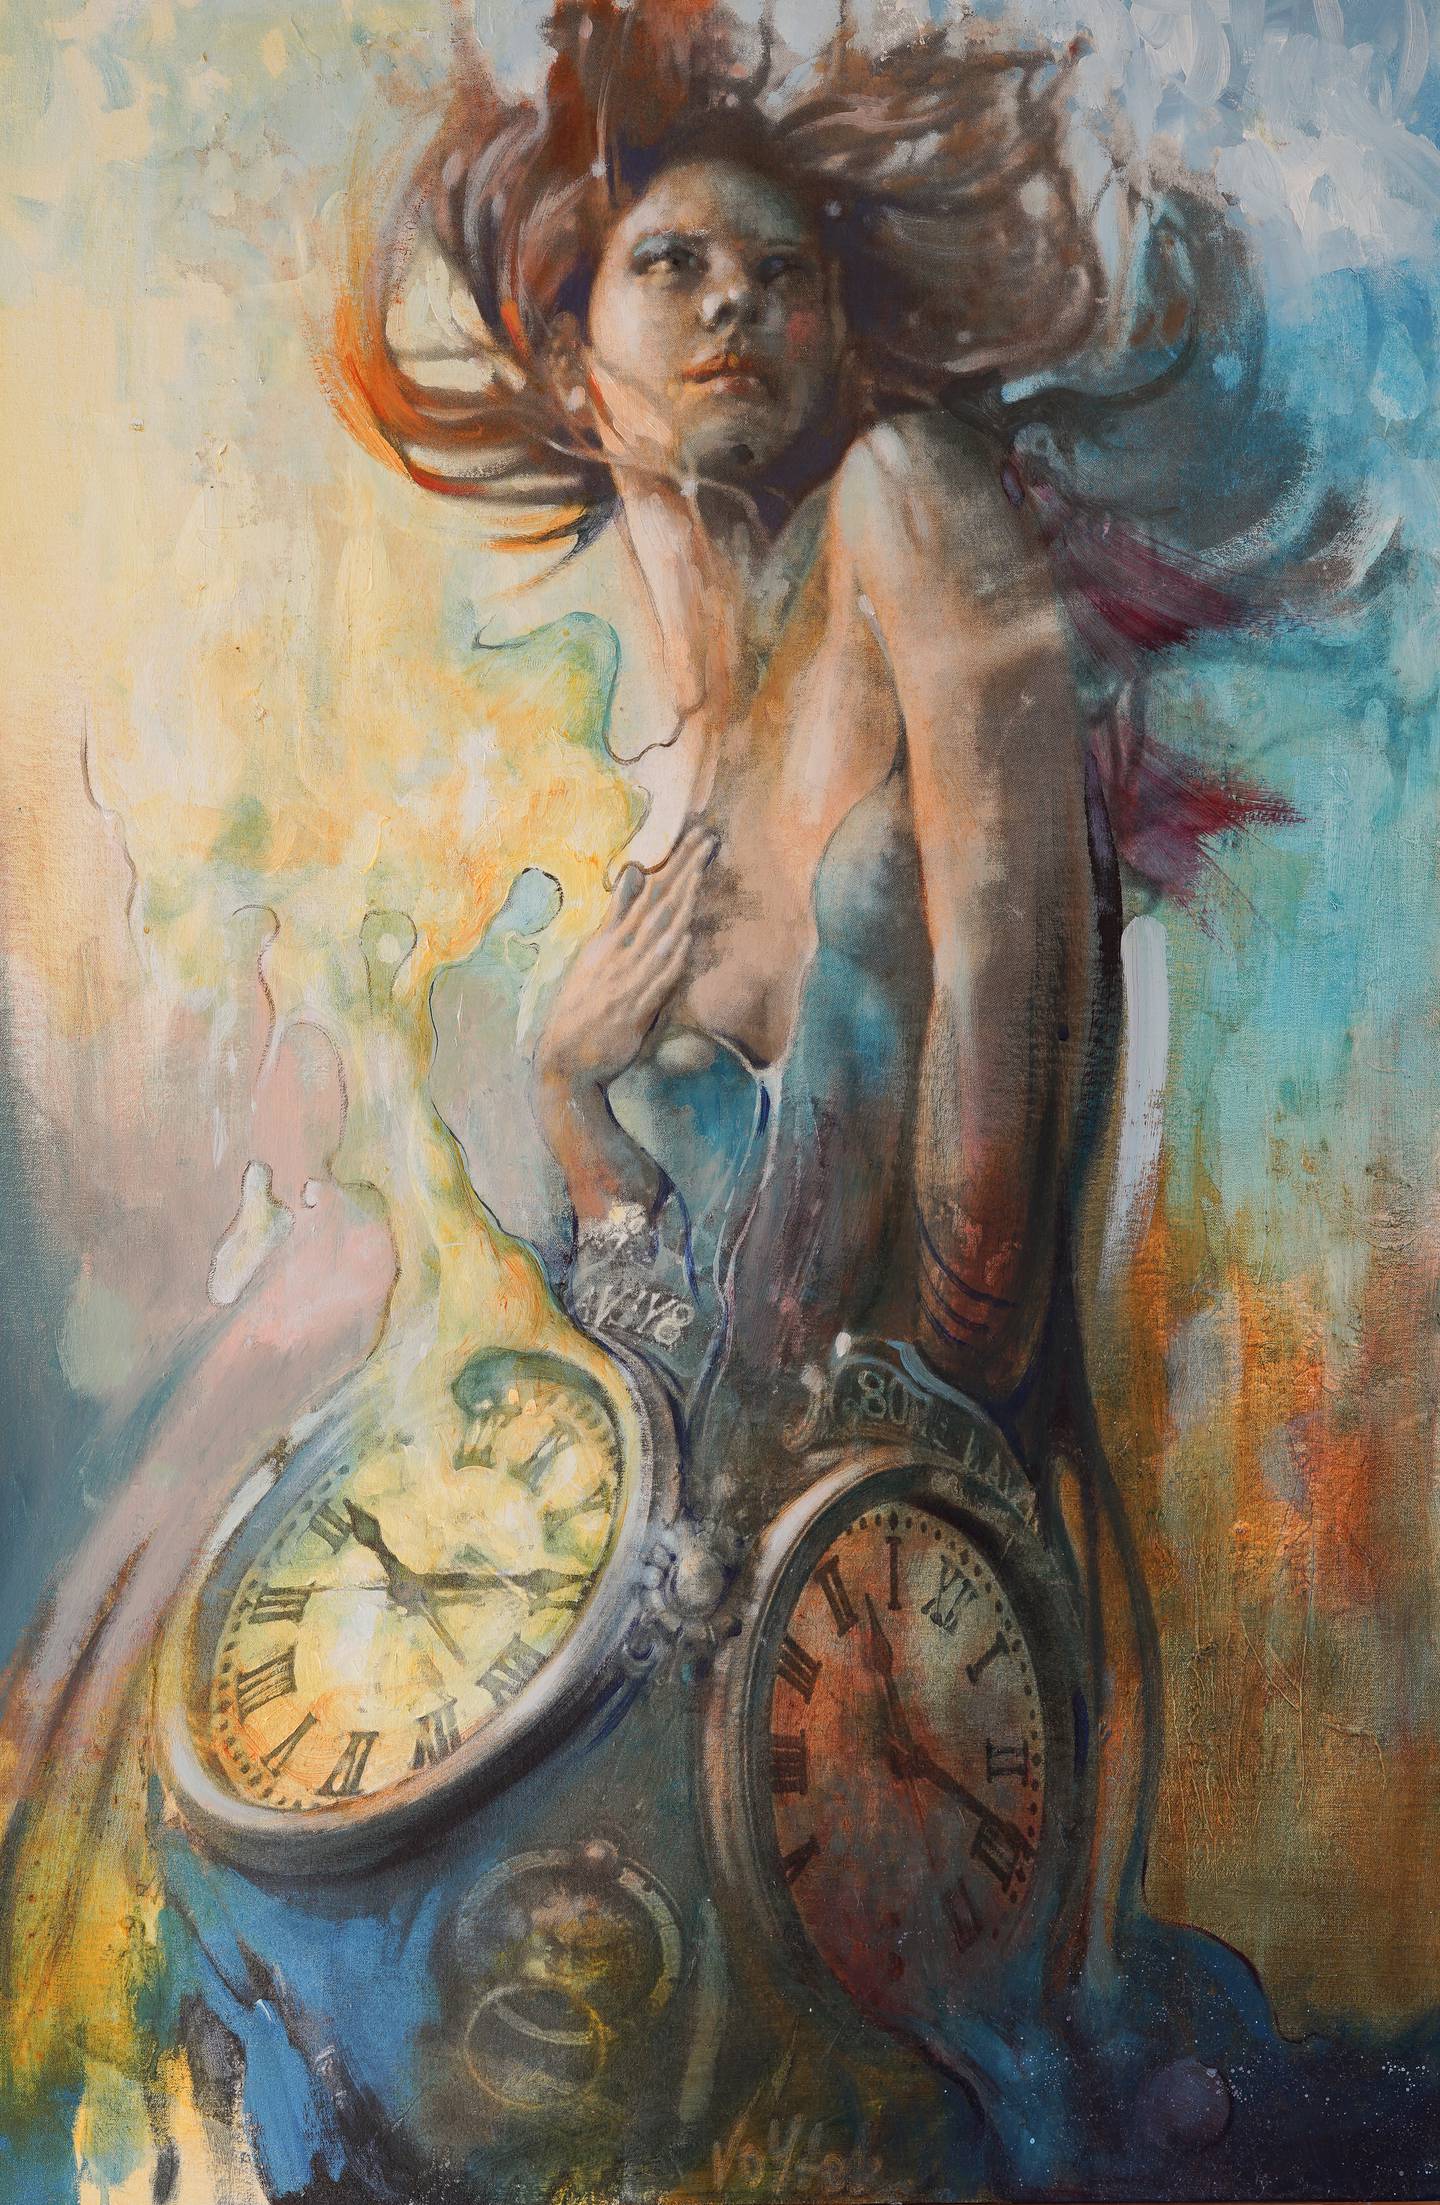 Artist Voytek's “Time Whisperer,” 37” x 52”, oil on canvas. 116 Gallery in St. Charles is hosting an opening for the Voytek exhibit Feb. 17, which will also serve as a fundraiser for Cal's Angels.